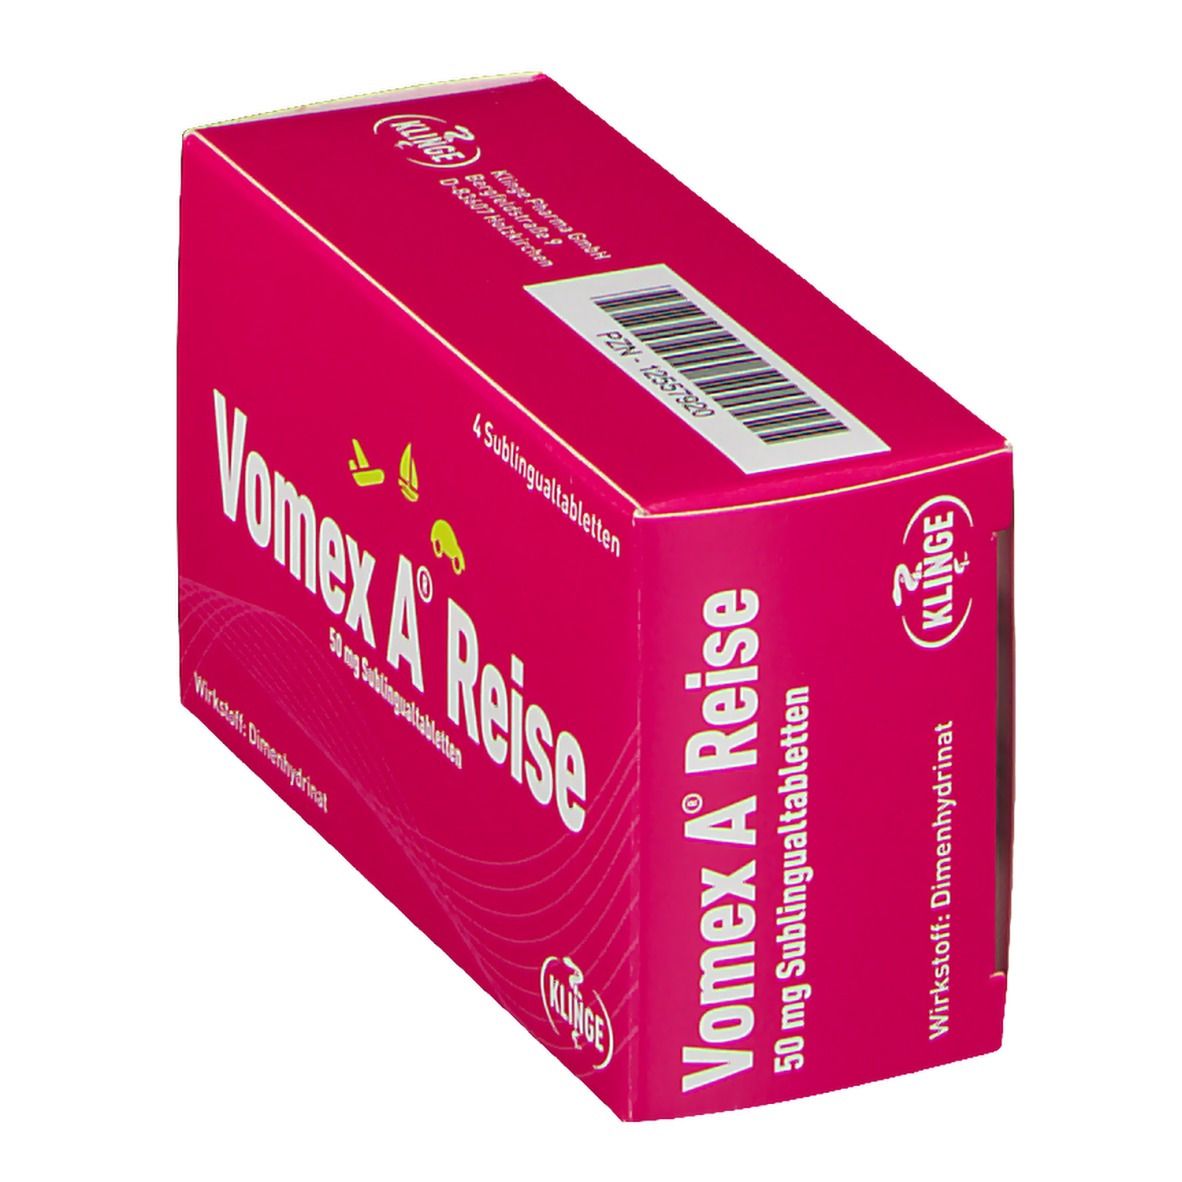 Vomex A® Reise 50 mg